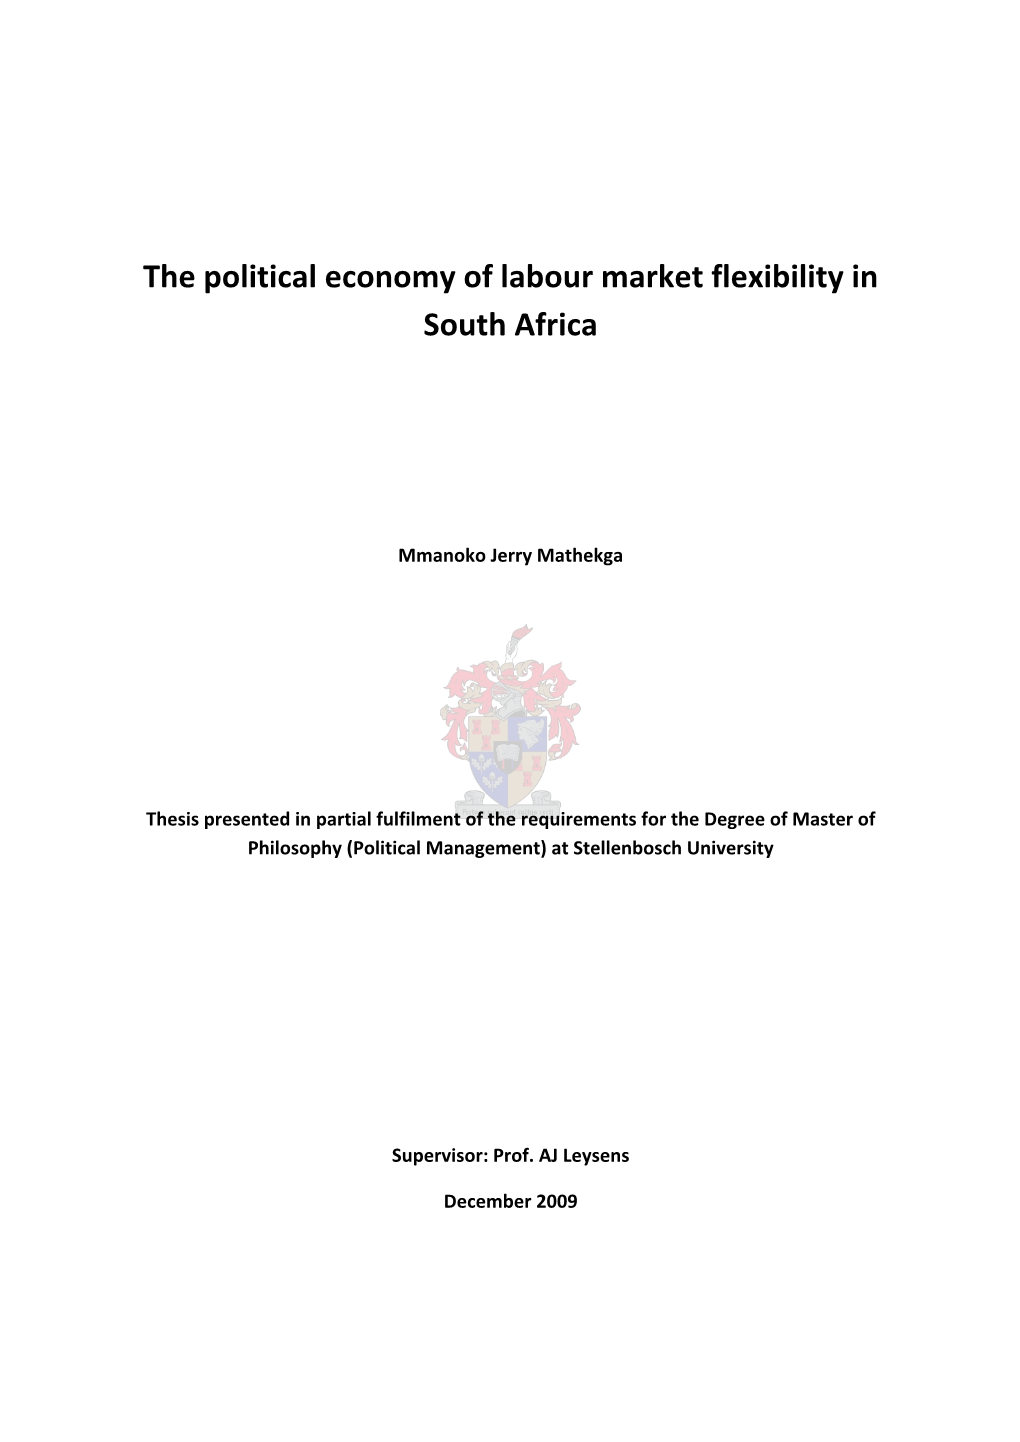 The Political Economy of Labour Market Flexibility in South Africa